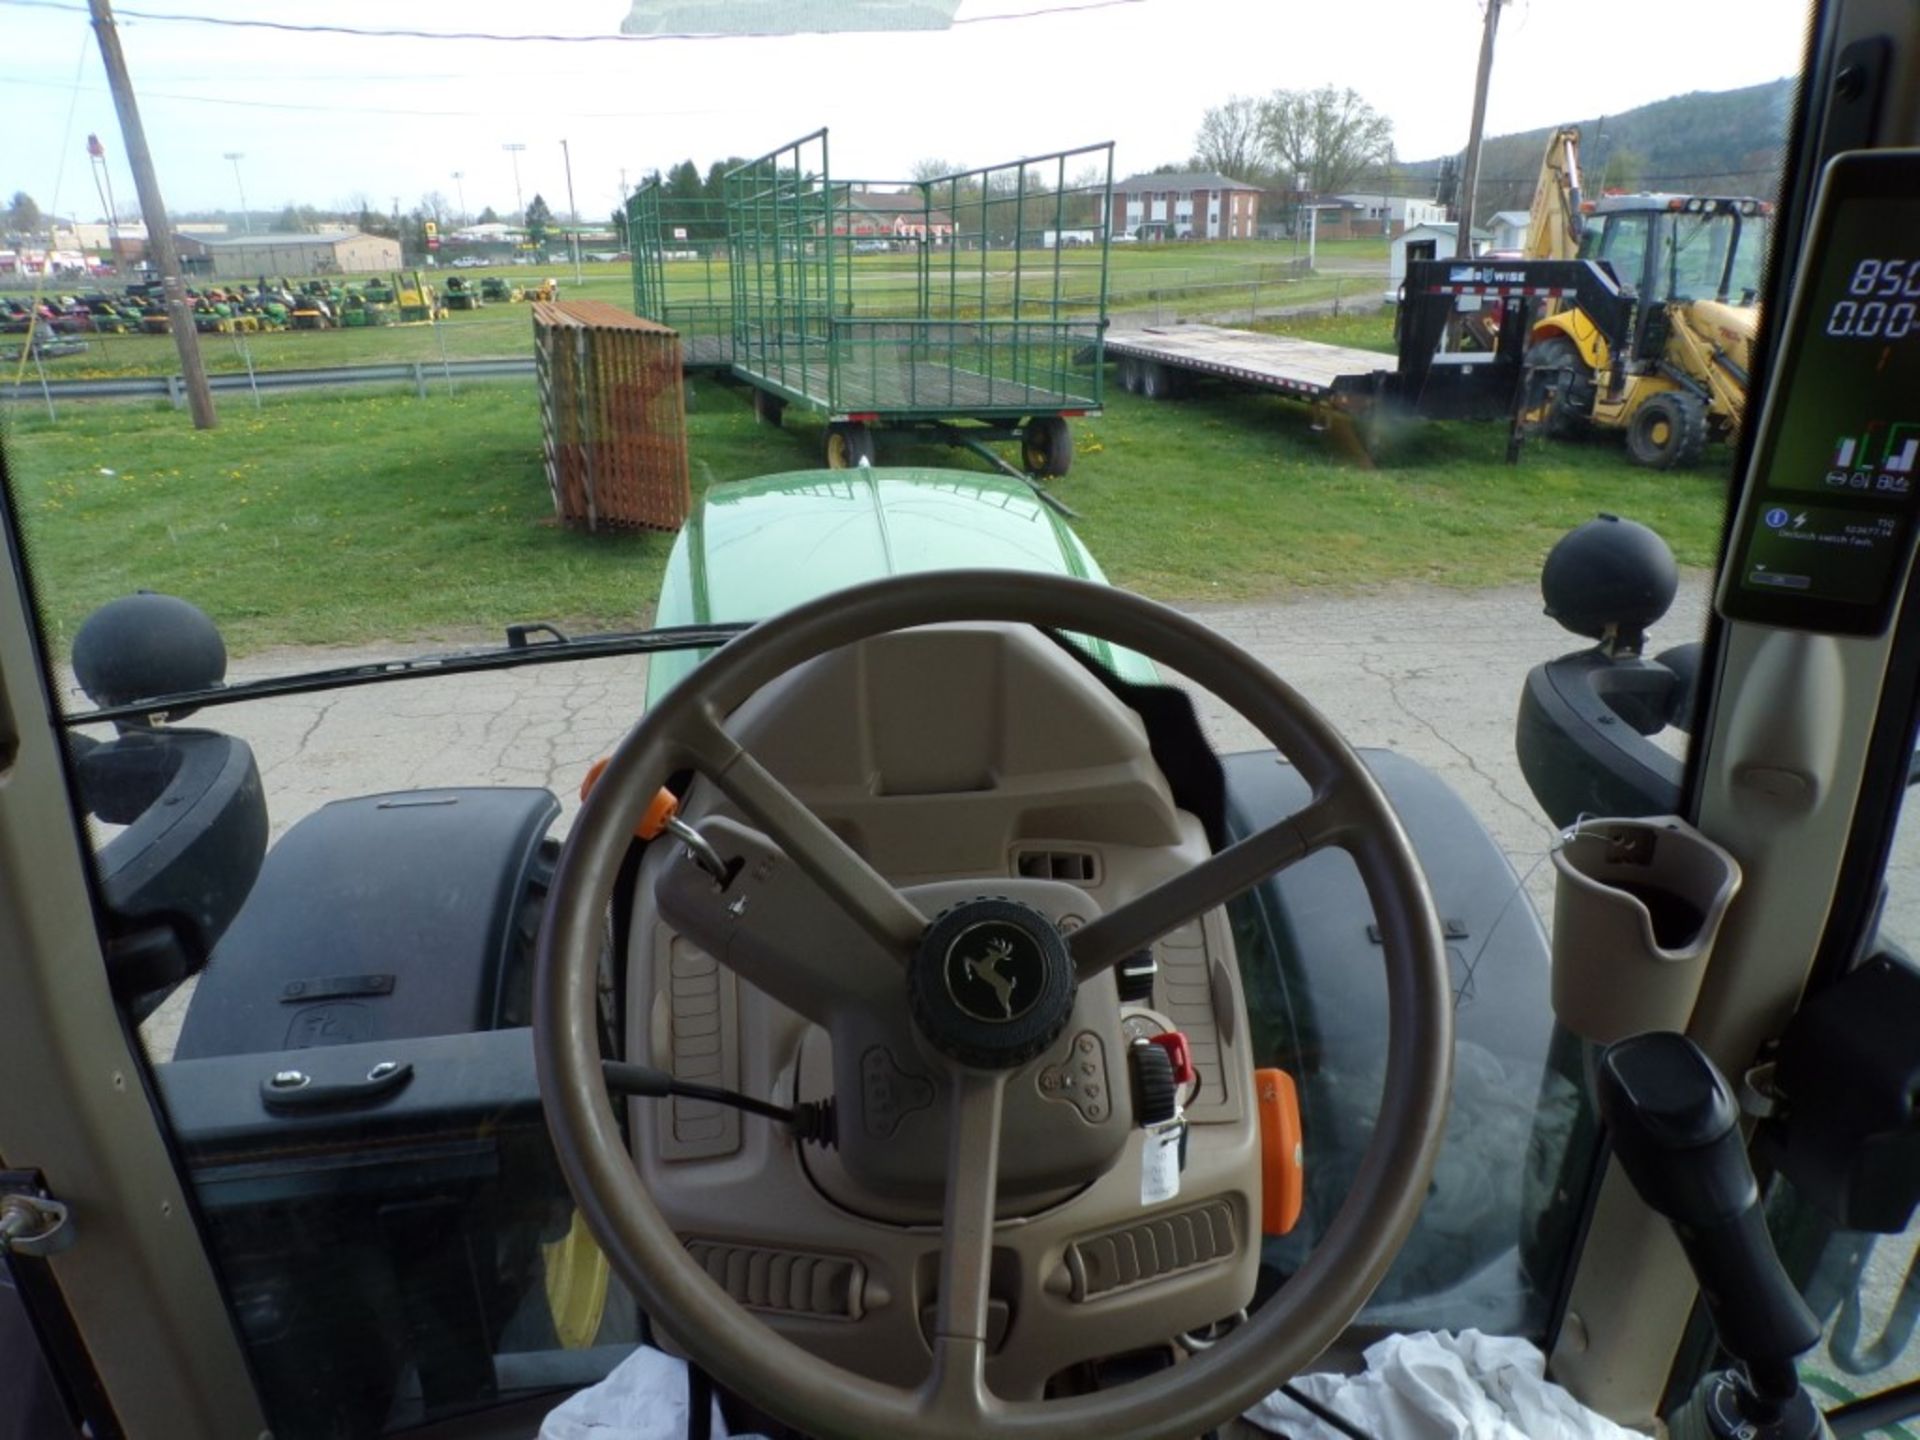 2021 John Deere 6195M, 4 WD Tractor, Power Shift Tans w/Screen, Rear Hyd. Remotes, Air Brake Hookup, - Image 8 of 8